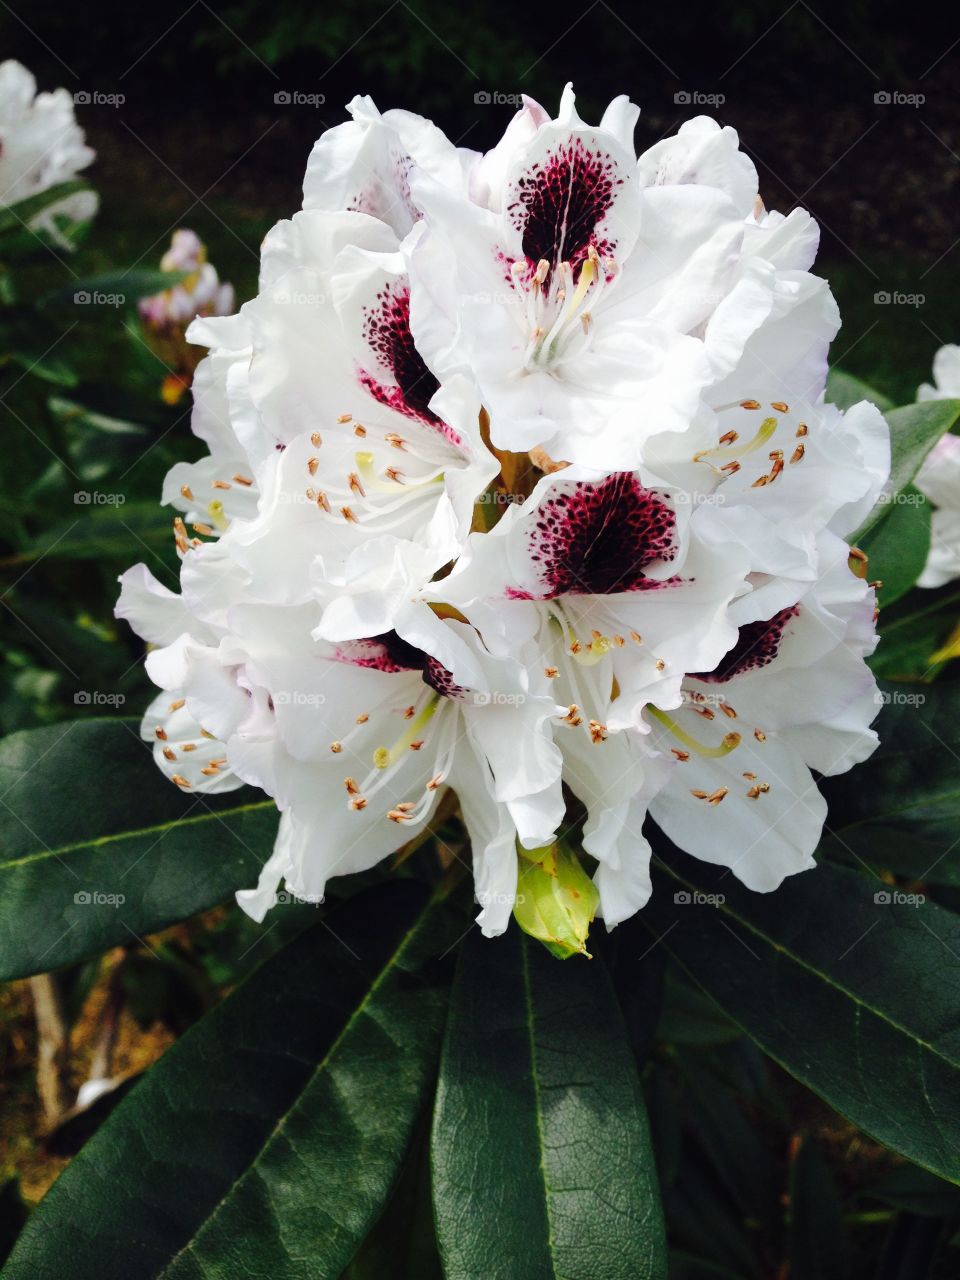 White Rhododendron. A white rhododendron with a purple center.